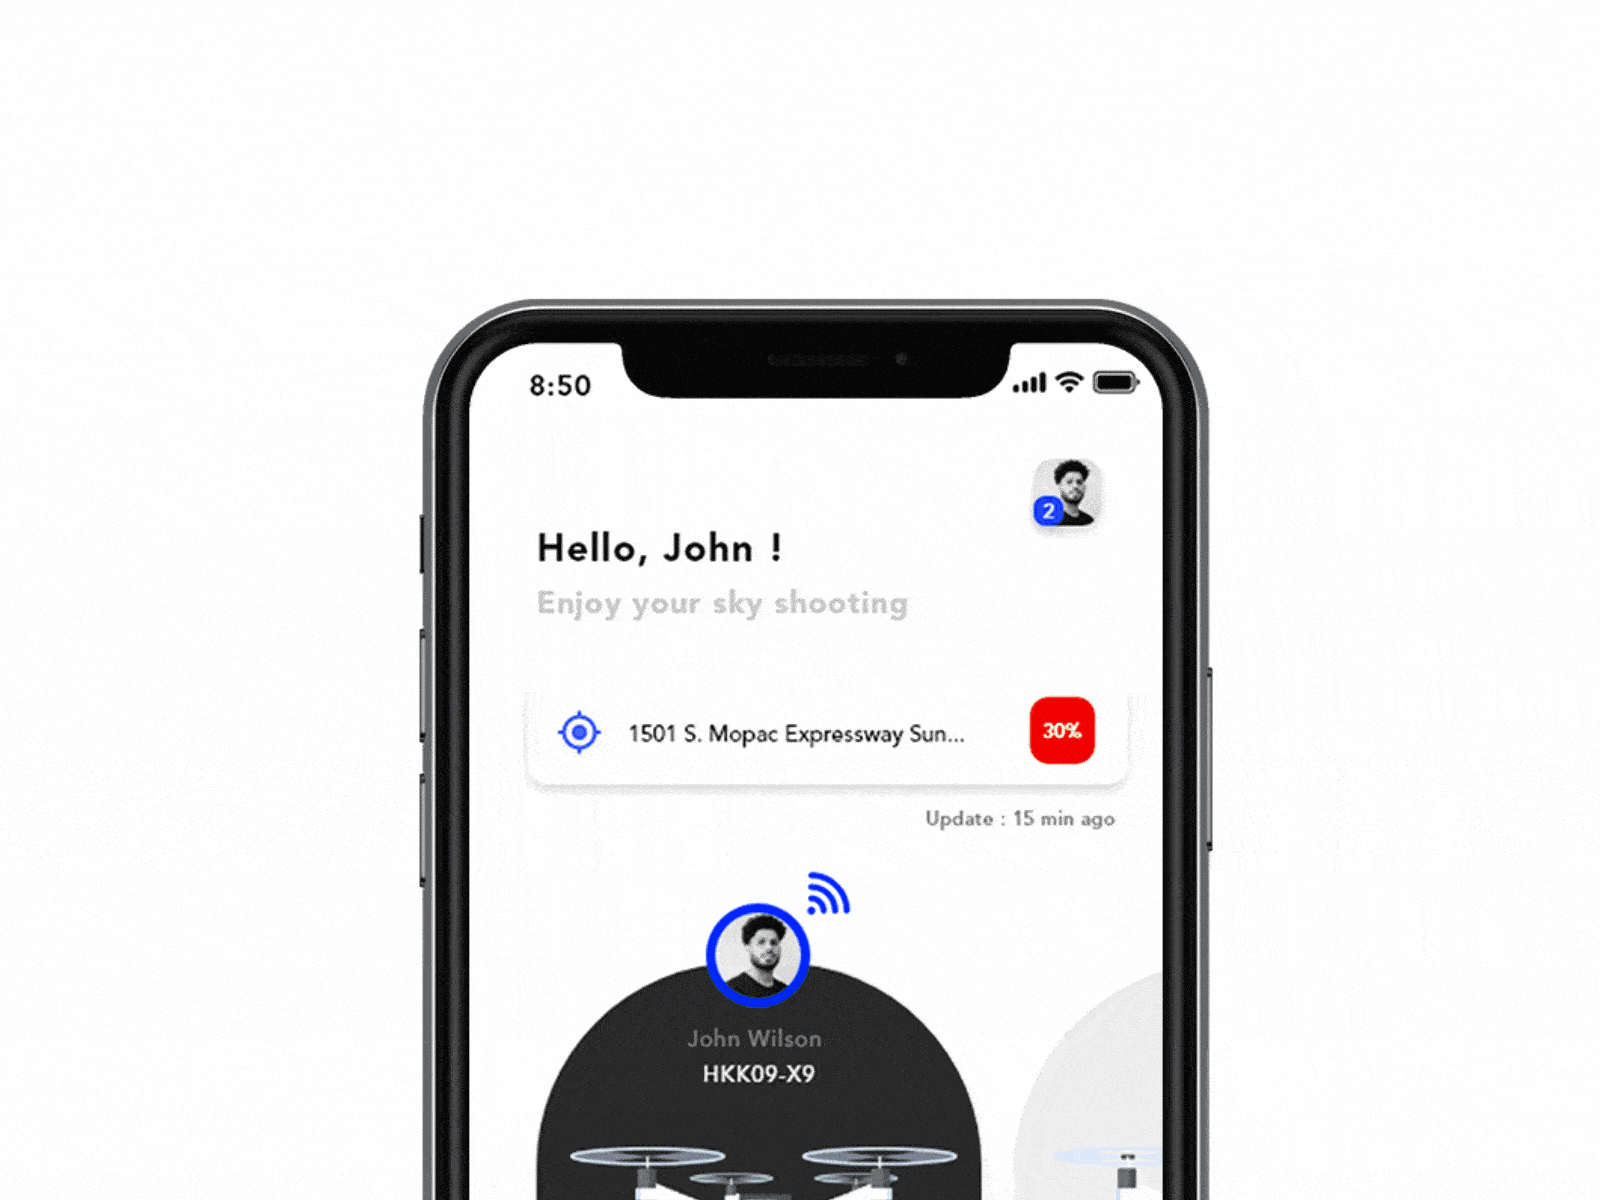 Camera drone app redesign 空拍無人機 adobe xd after affects ai animation camera camera app clean color concept creative drone illustration photo redesign concept shoot tech technical uidesign